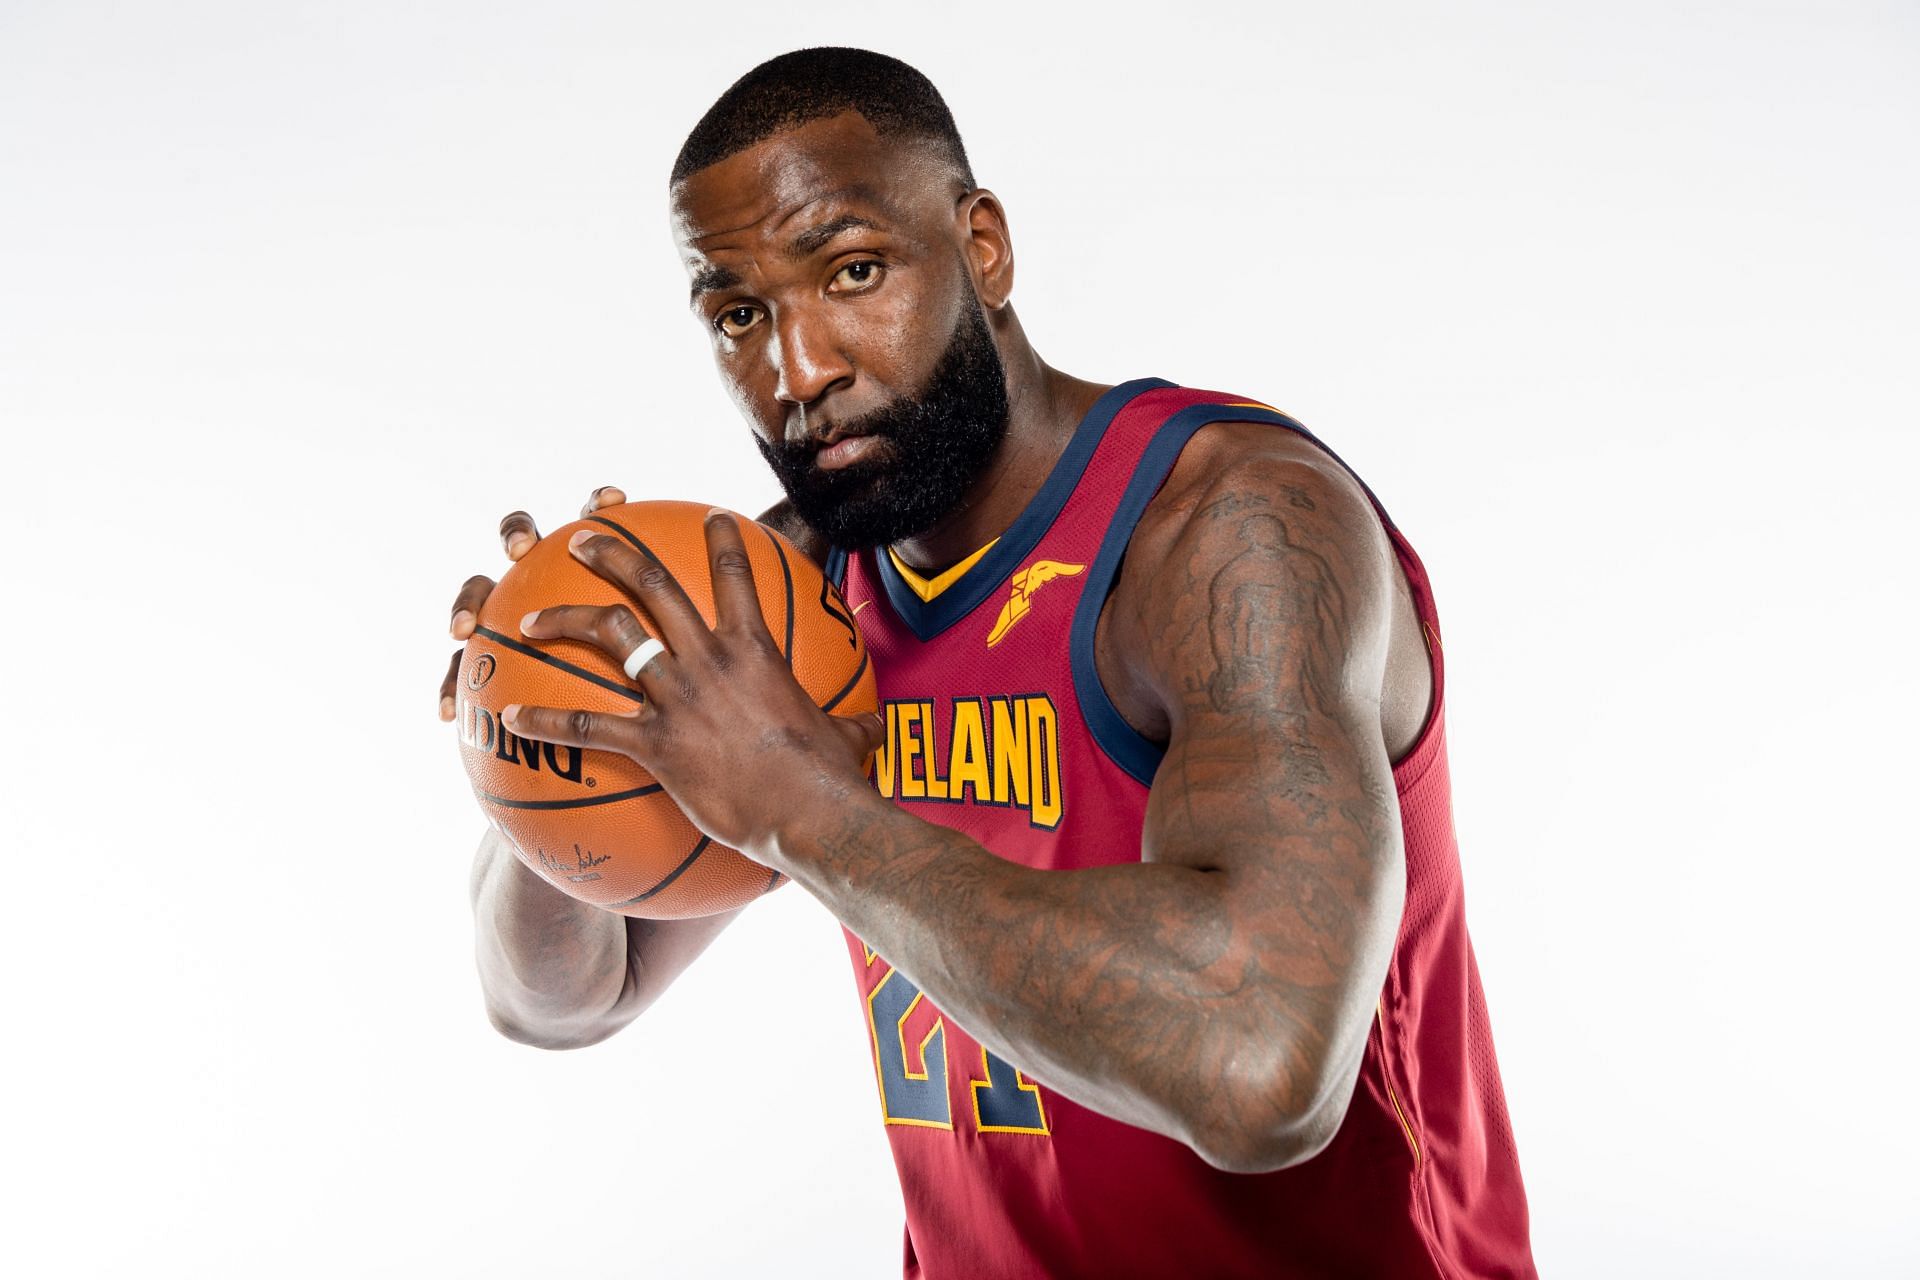 Kendrick Perkins during his time with the Cleveland Cavaliers